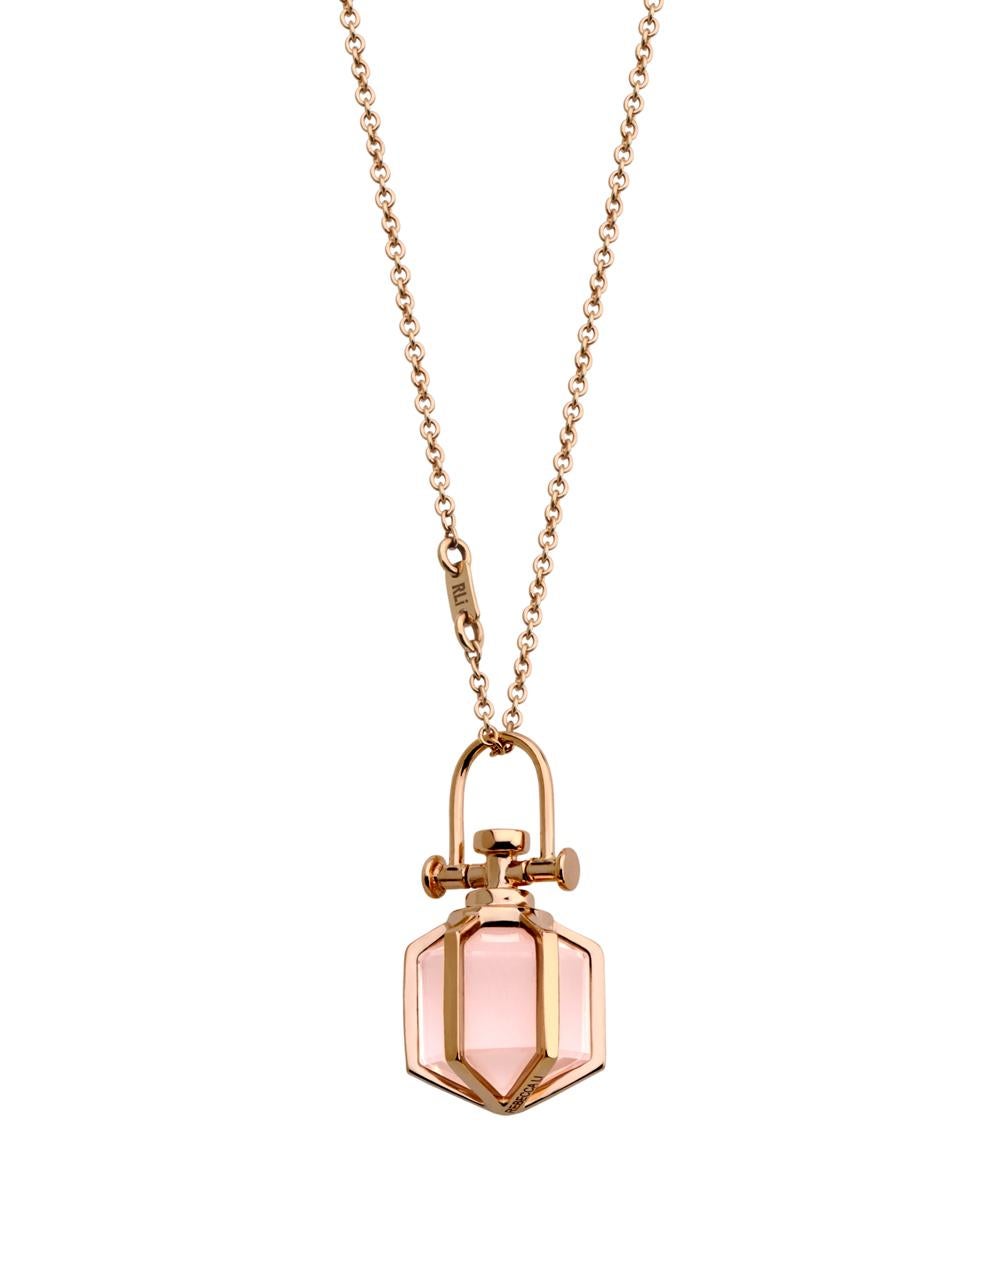 Rebecca Li designs mindfulness.
This sacred hexagon inspired necklace  signifies our intuition.
Rose Quartz means Love & Happy.

Talisman Pendant :
18K Rose Gold
Natural Rose Quartz
Pendant Size: 9 mm W * 9 mm D * 18 mm H
Gemstone Size:  8 mm W * 8